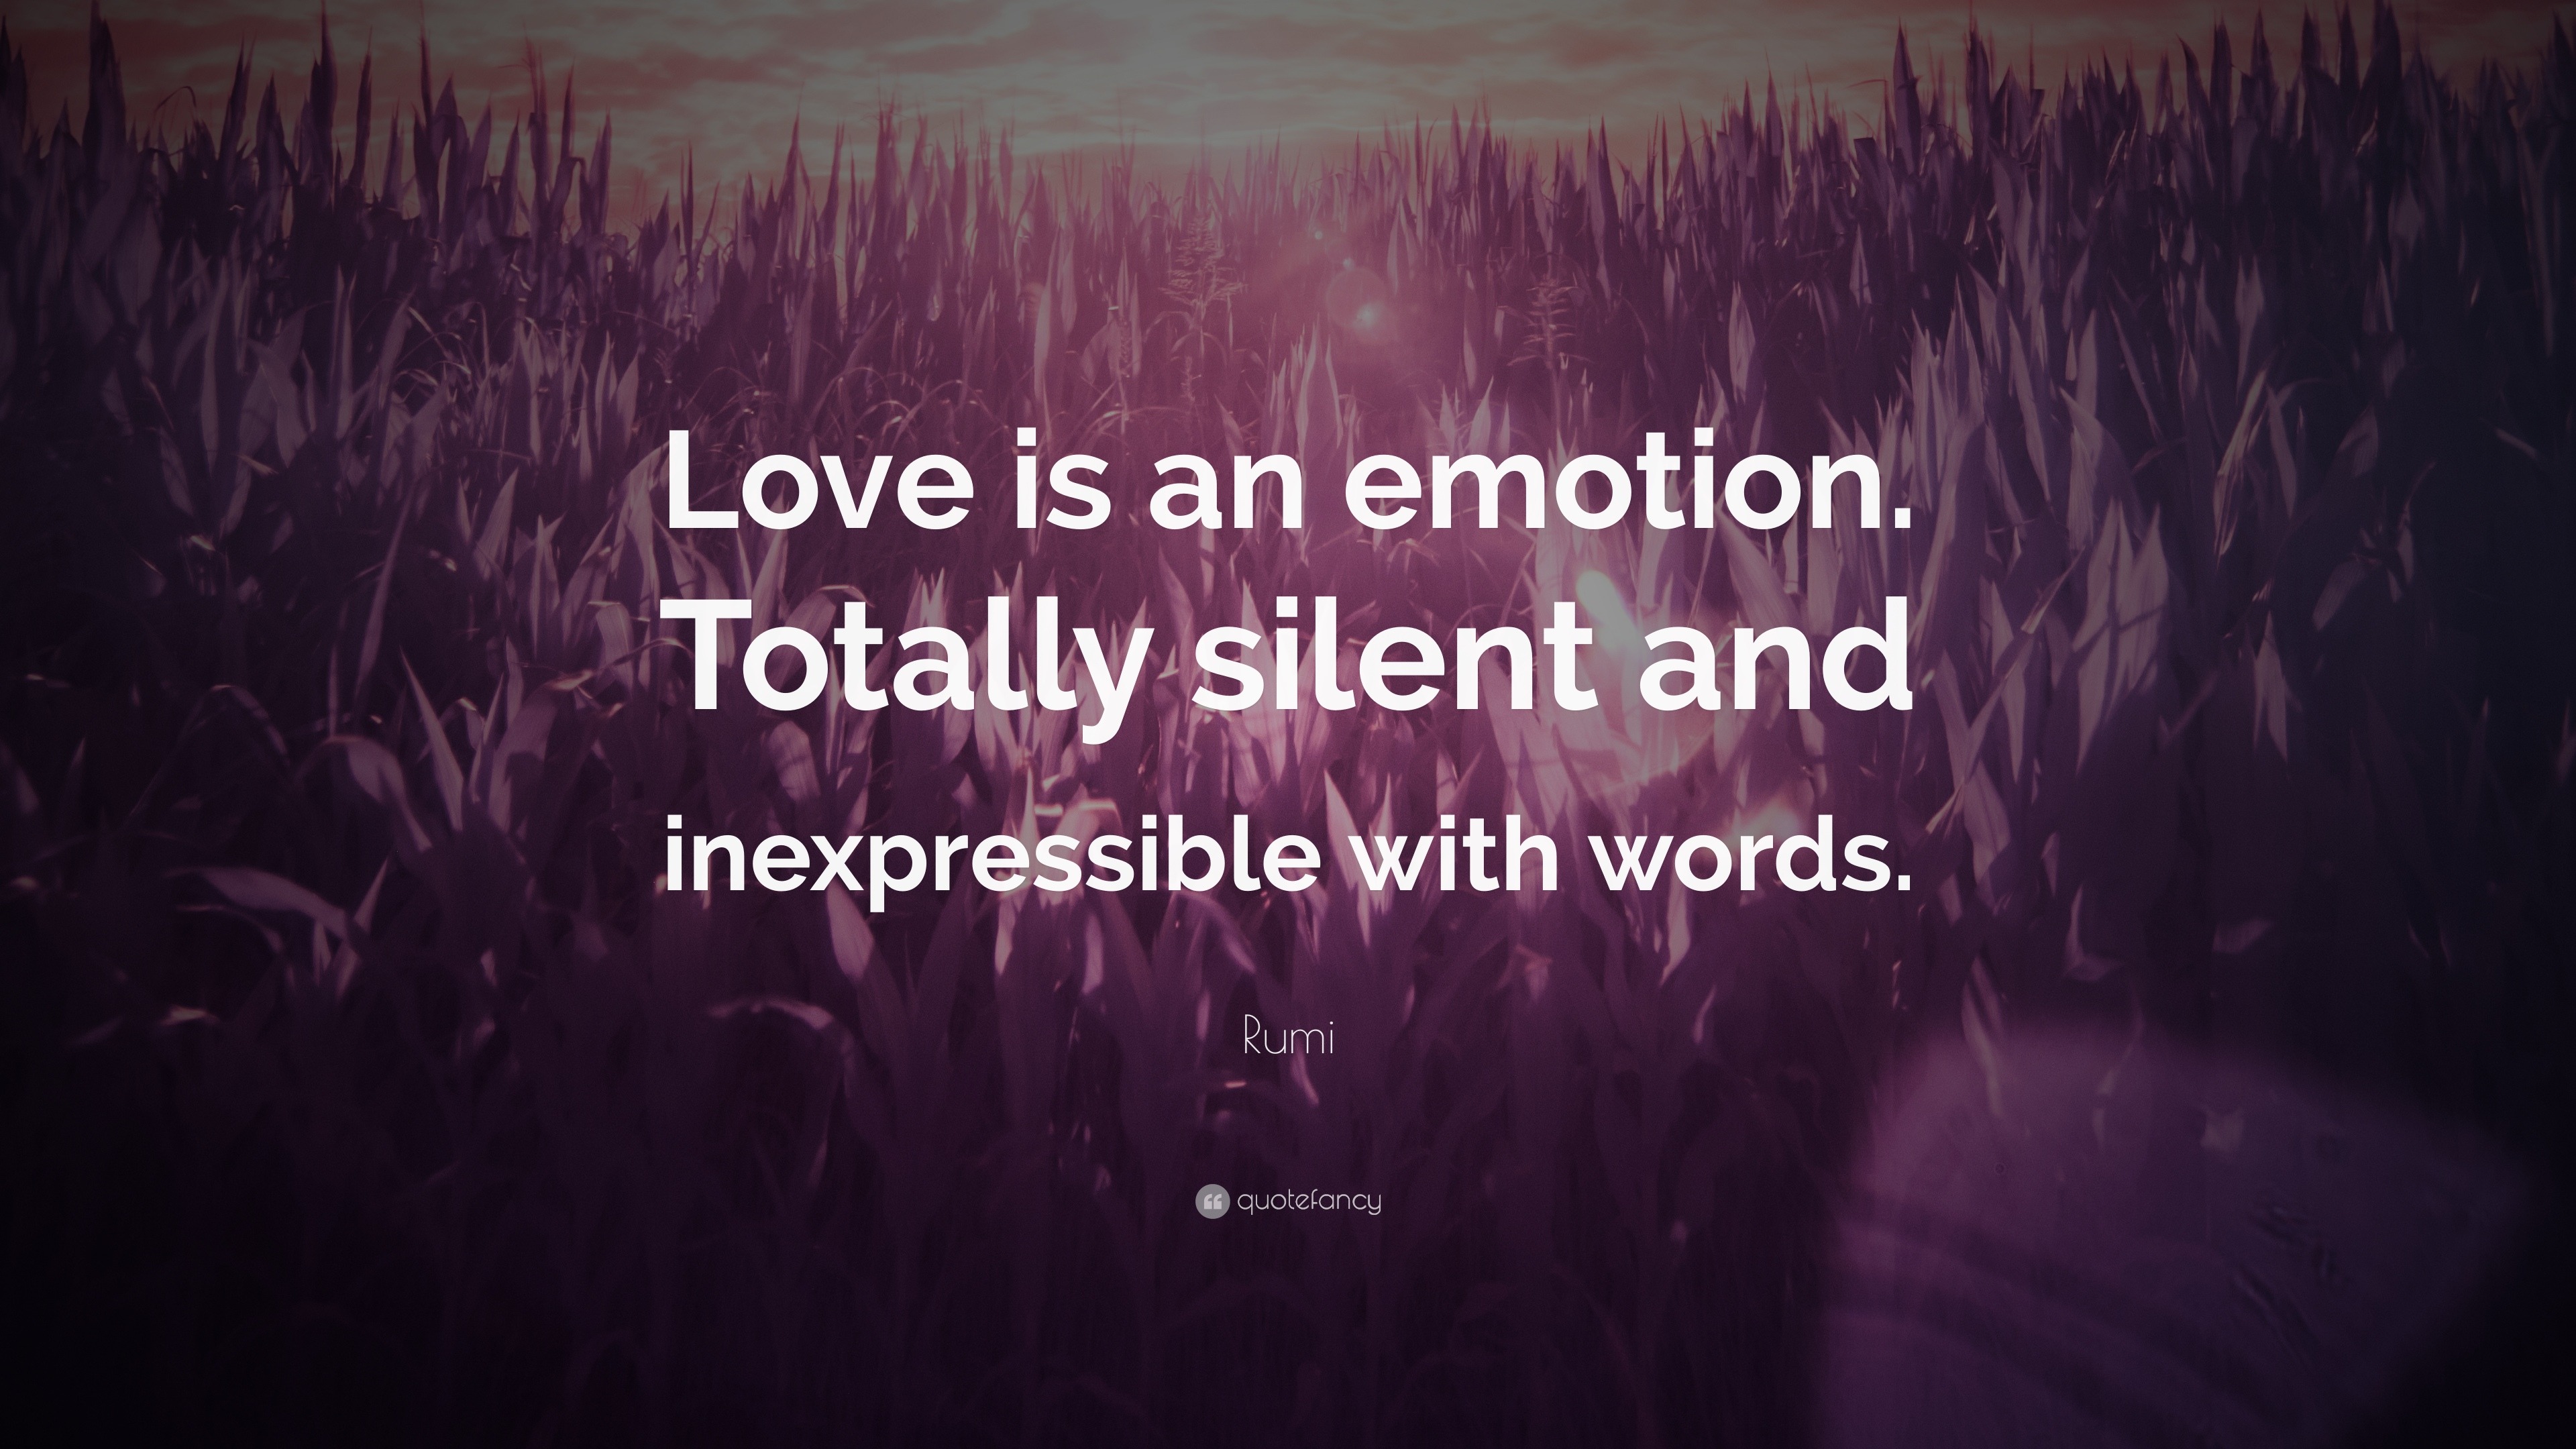 Rumi Quote “Love is an emotion. Totally silent and